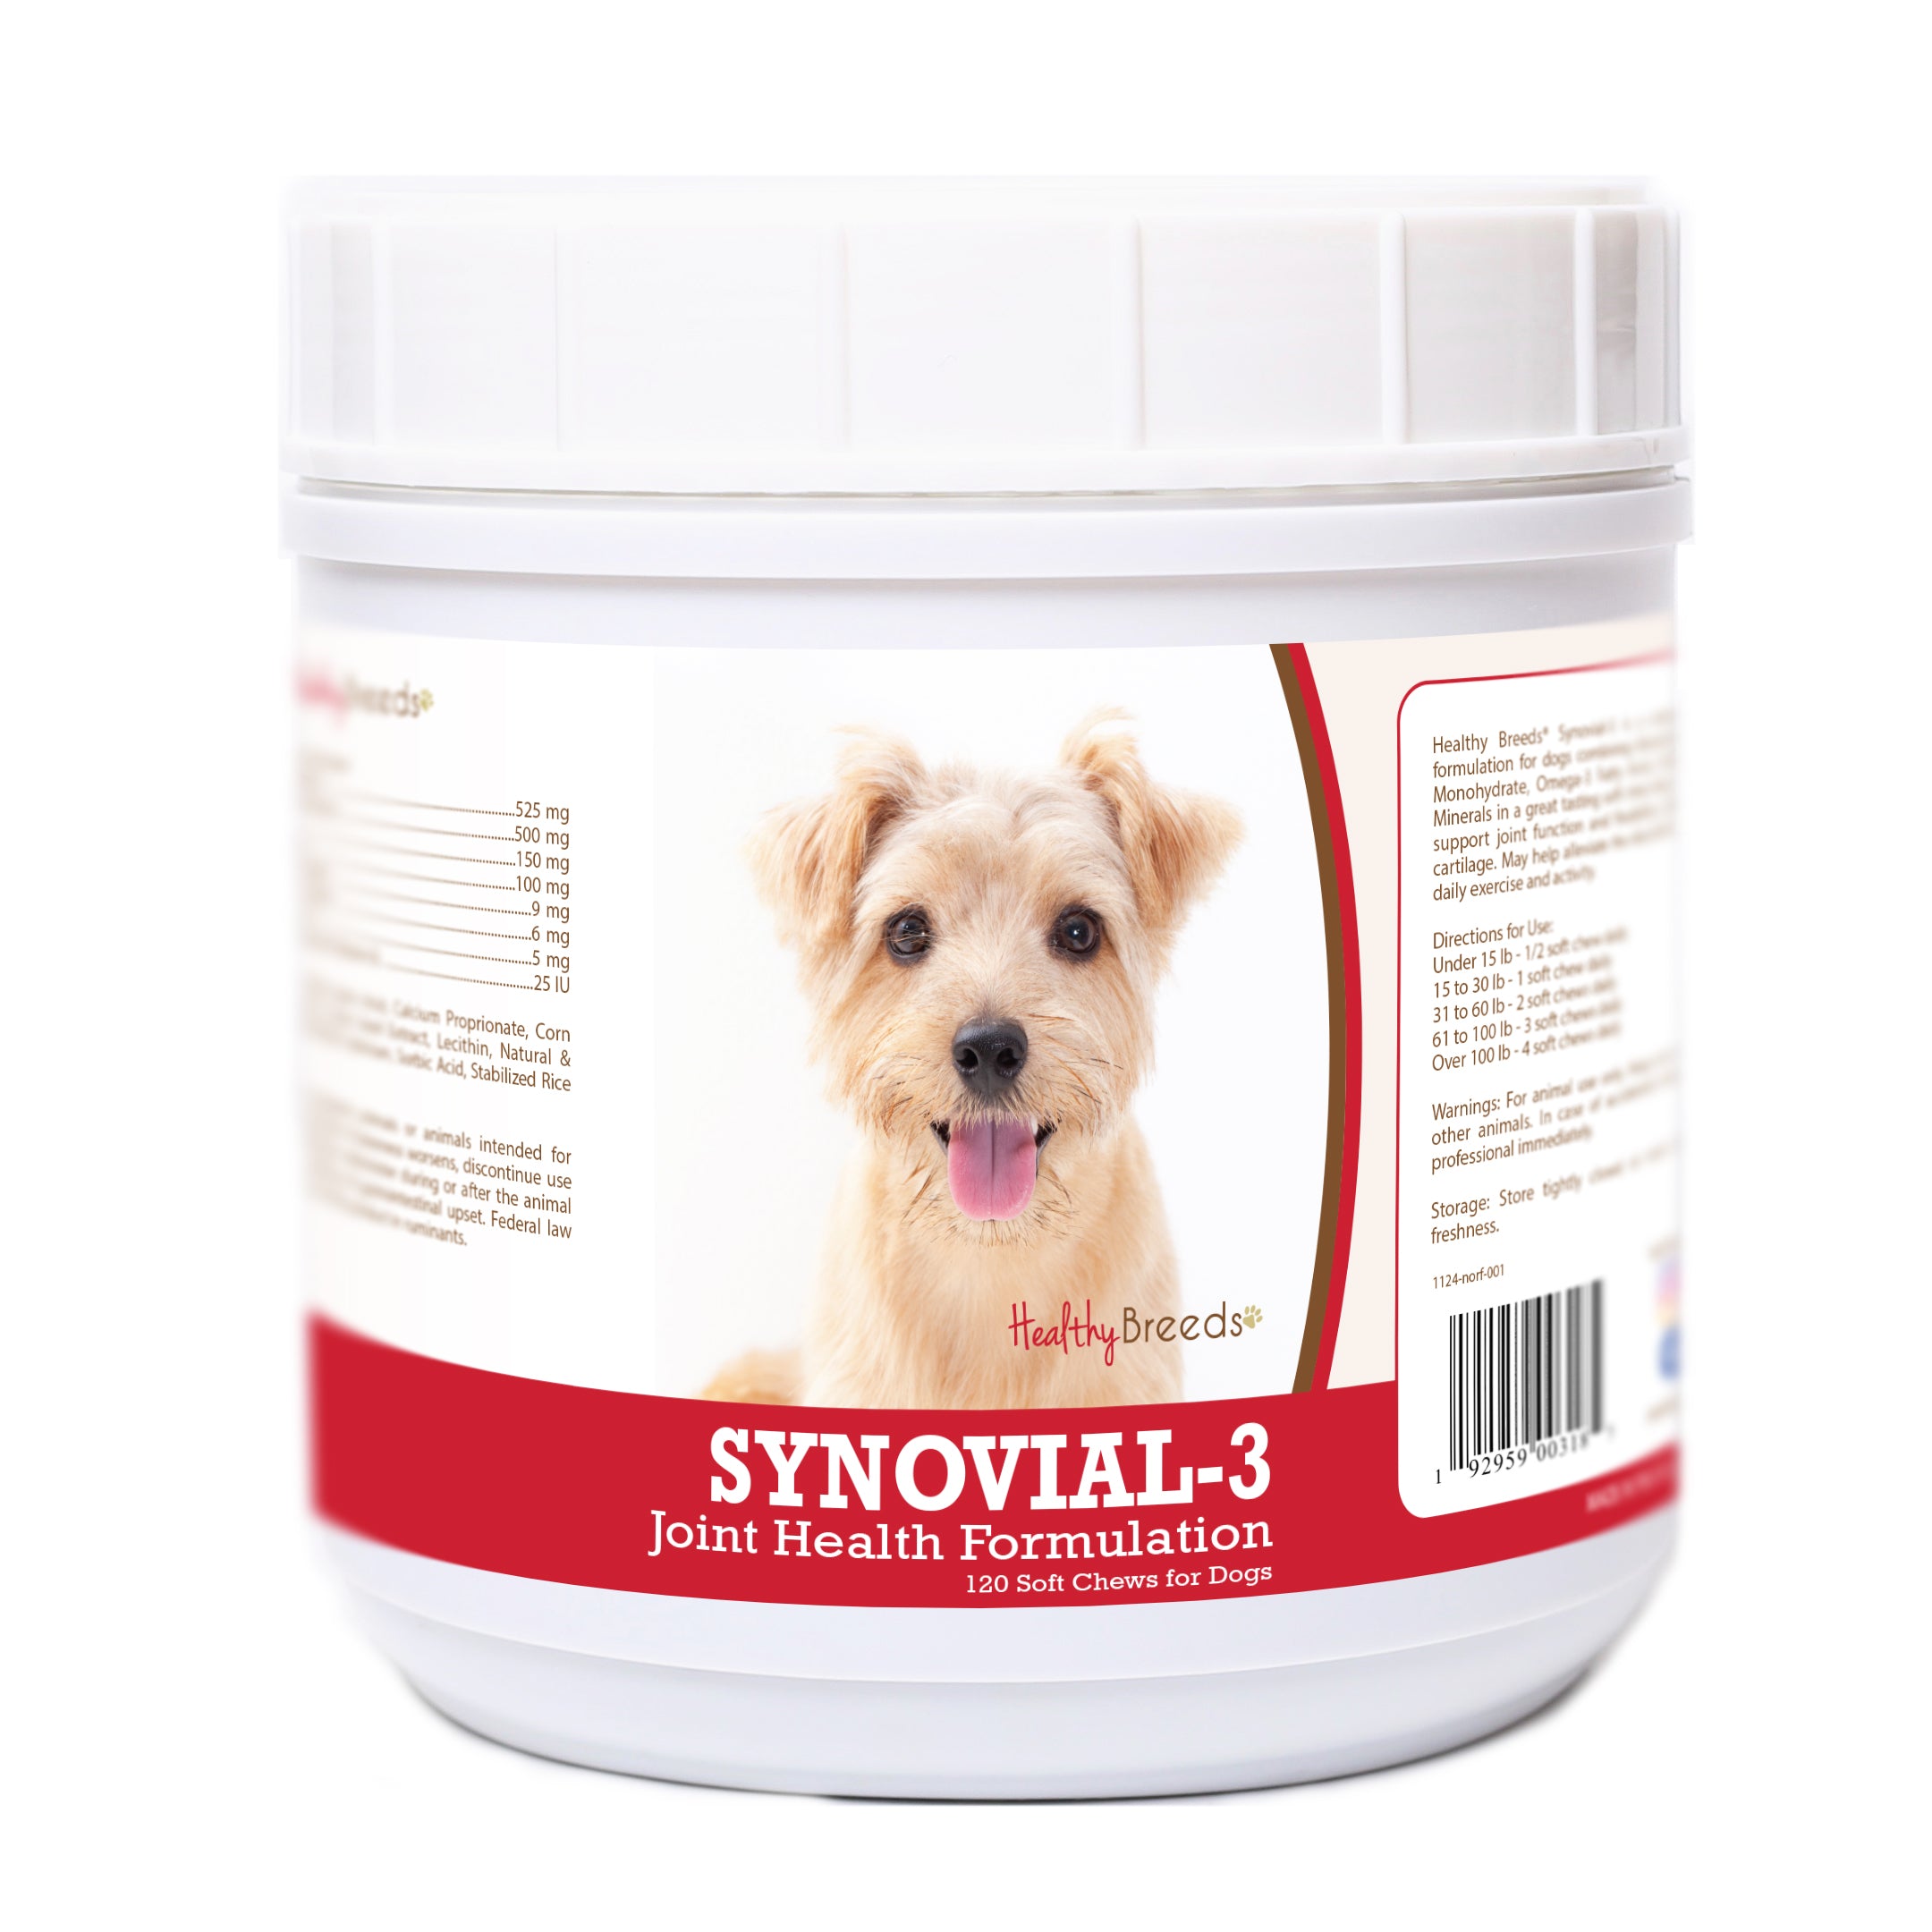 Norfolk Terrier Synovial-3 Joint Health Formulation Soft Chews 120 Count